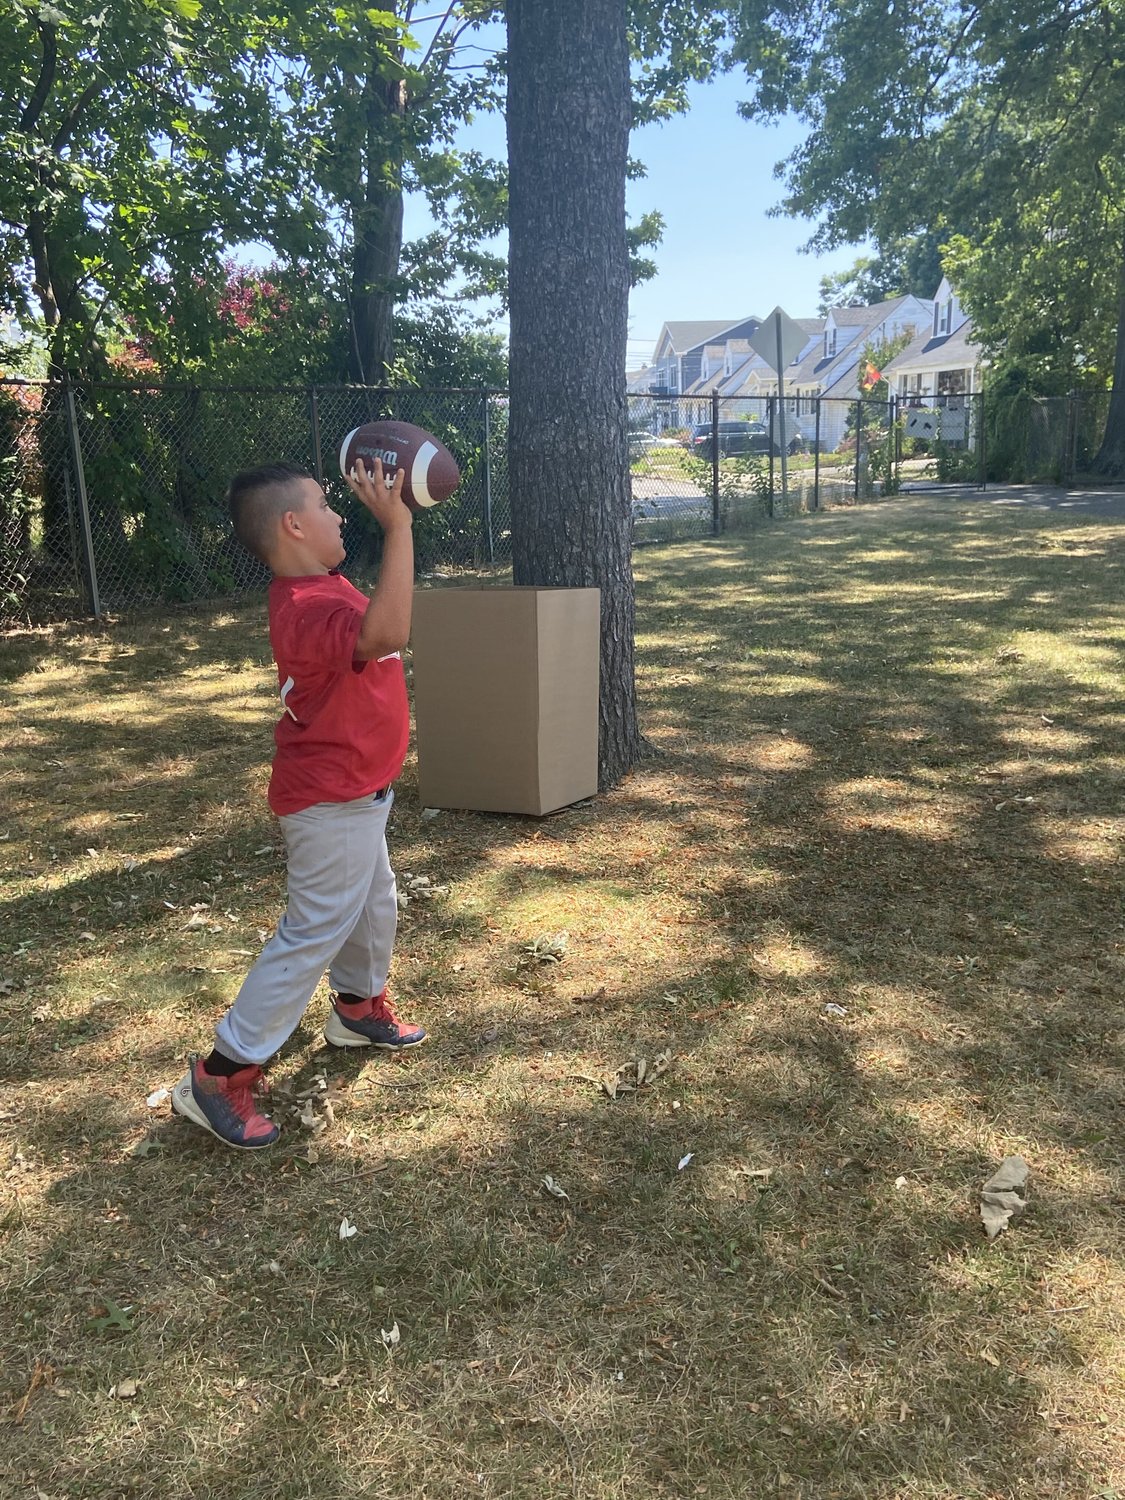 Christian Krug enjoyed a game of football after winning his little league game.